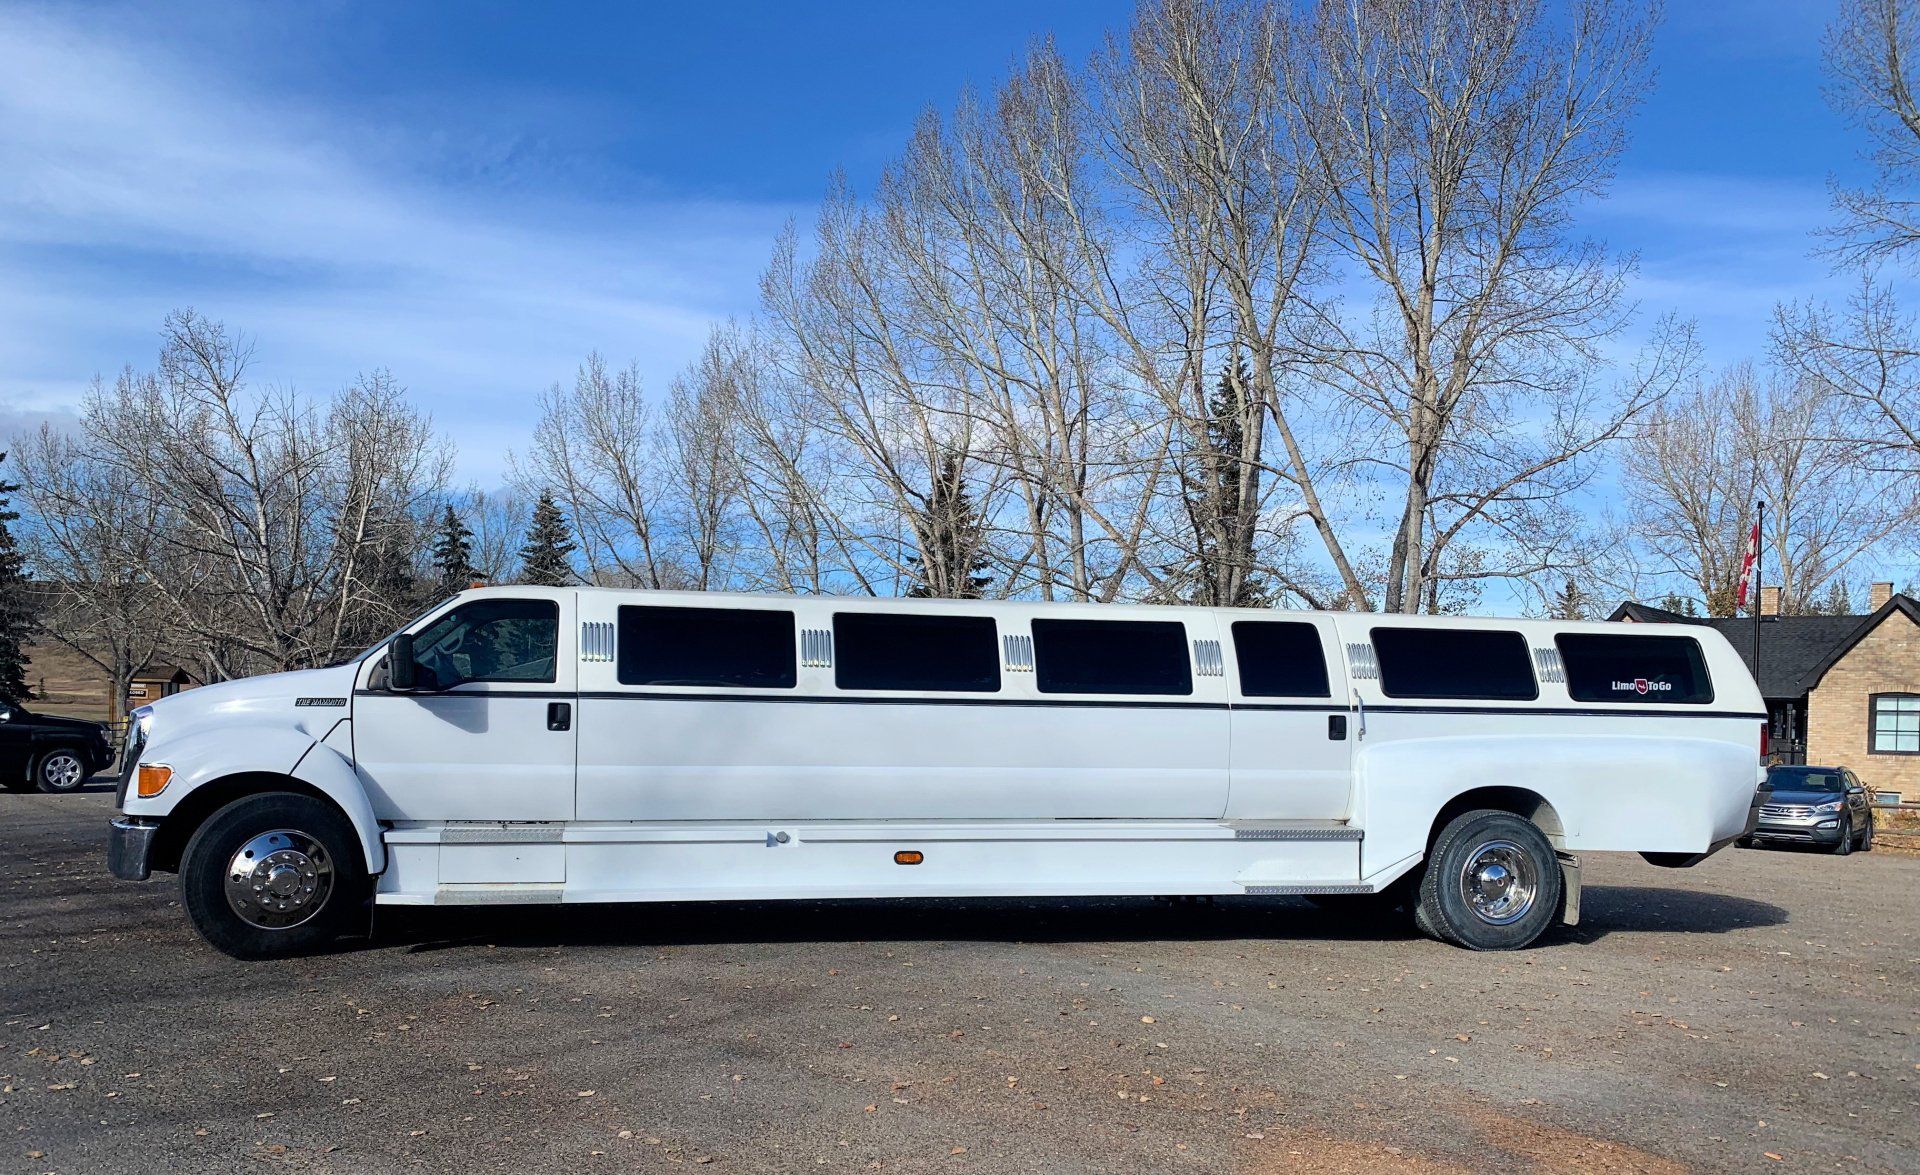 Limo To go 28 passenger stretch truck mammoth limousine exterior view